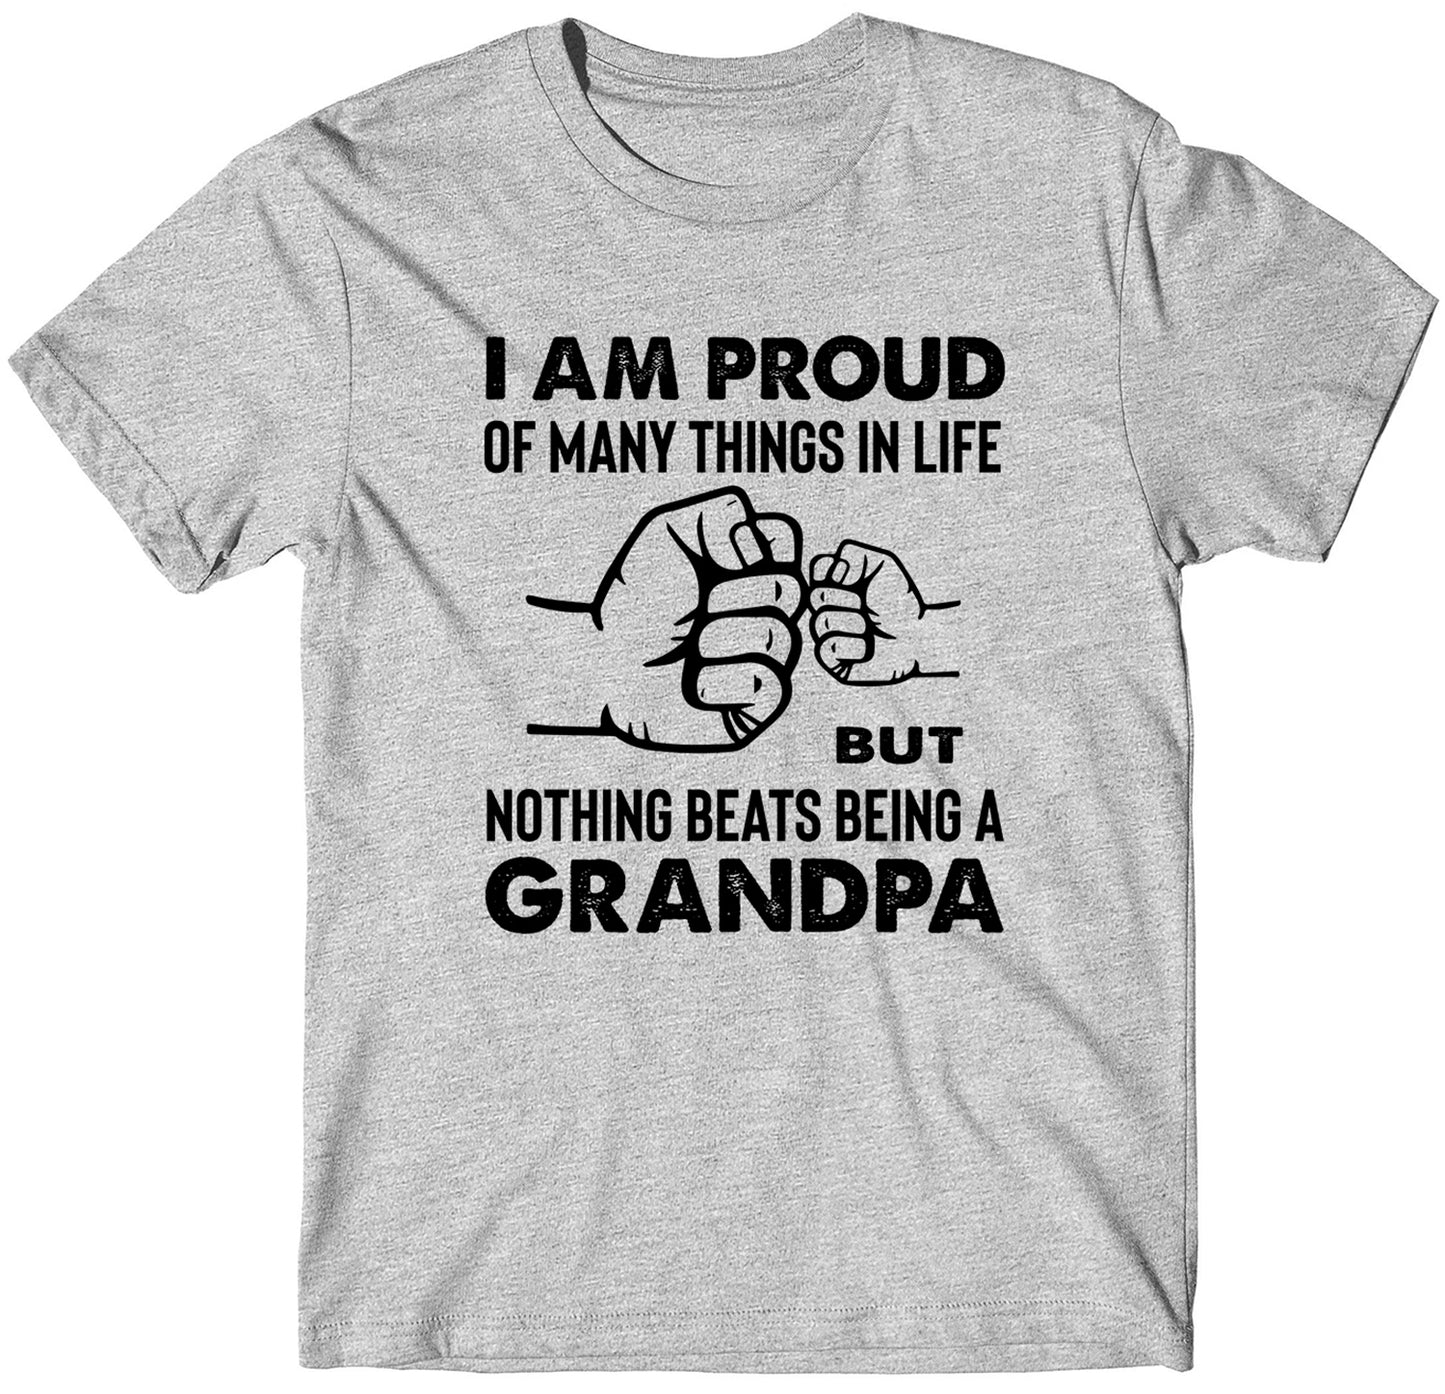 I Am Proud of Many Things in Life But Nothing Beats Grandpa T-Shirt